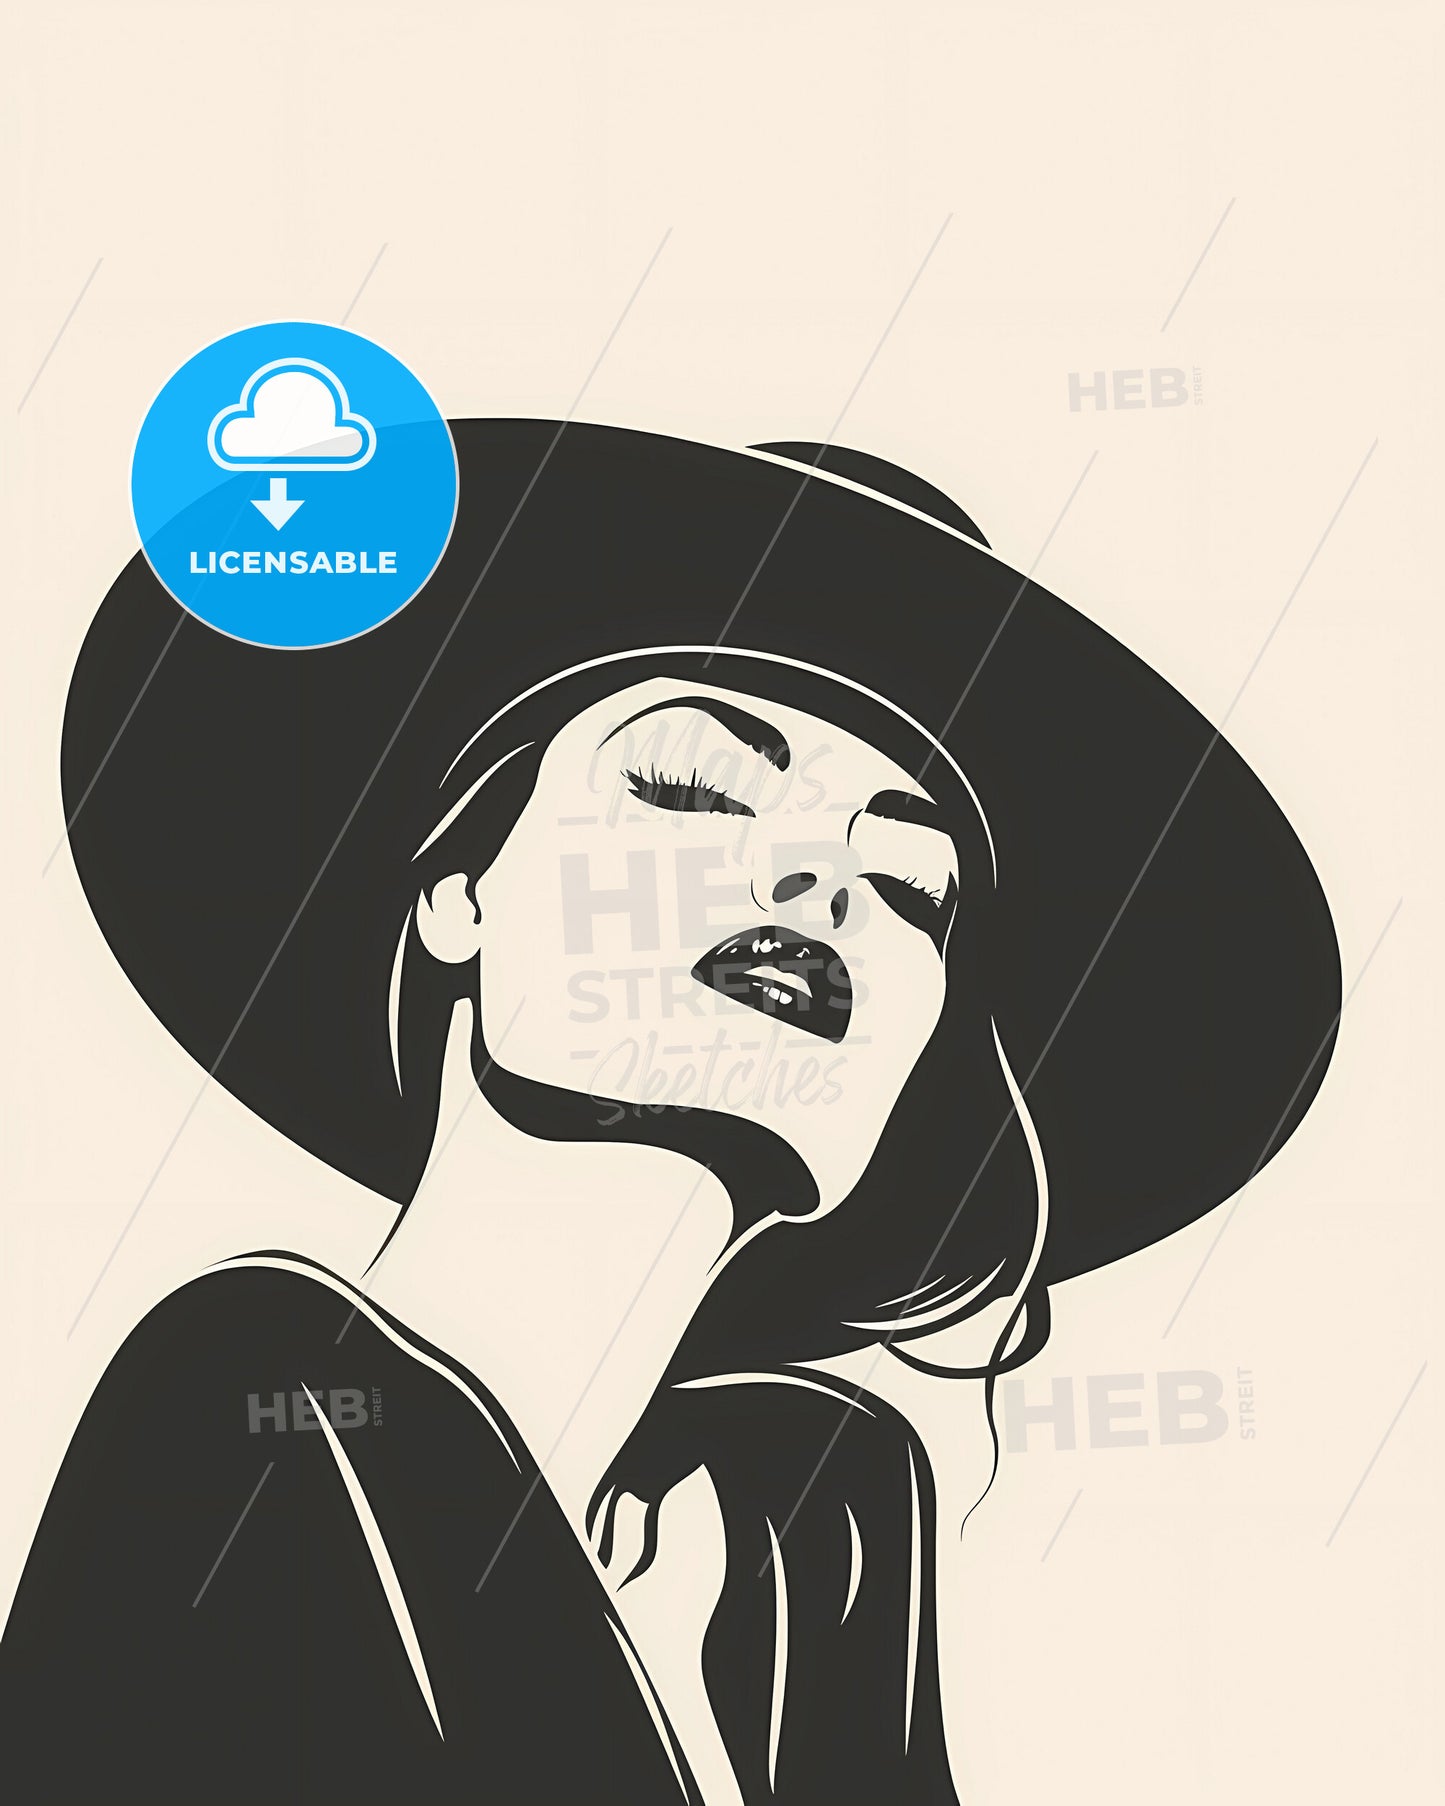 Minimalist Retro Fashion Art Poster: Black and White Illustration of a Hatted Woman